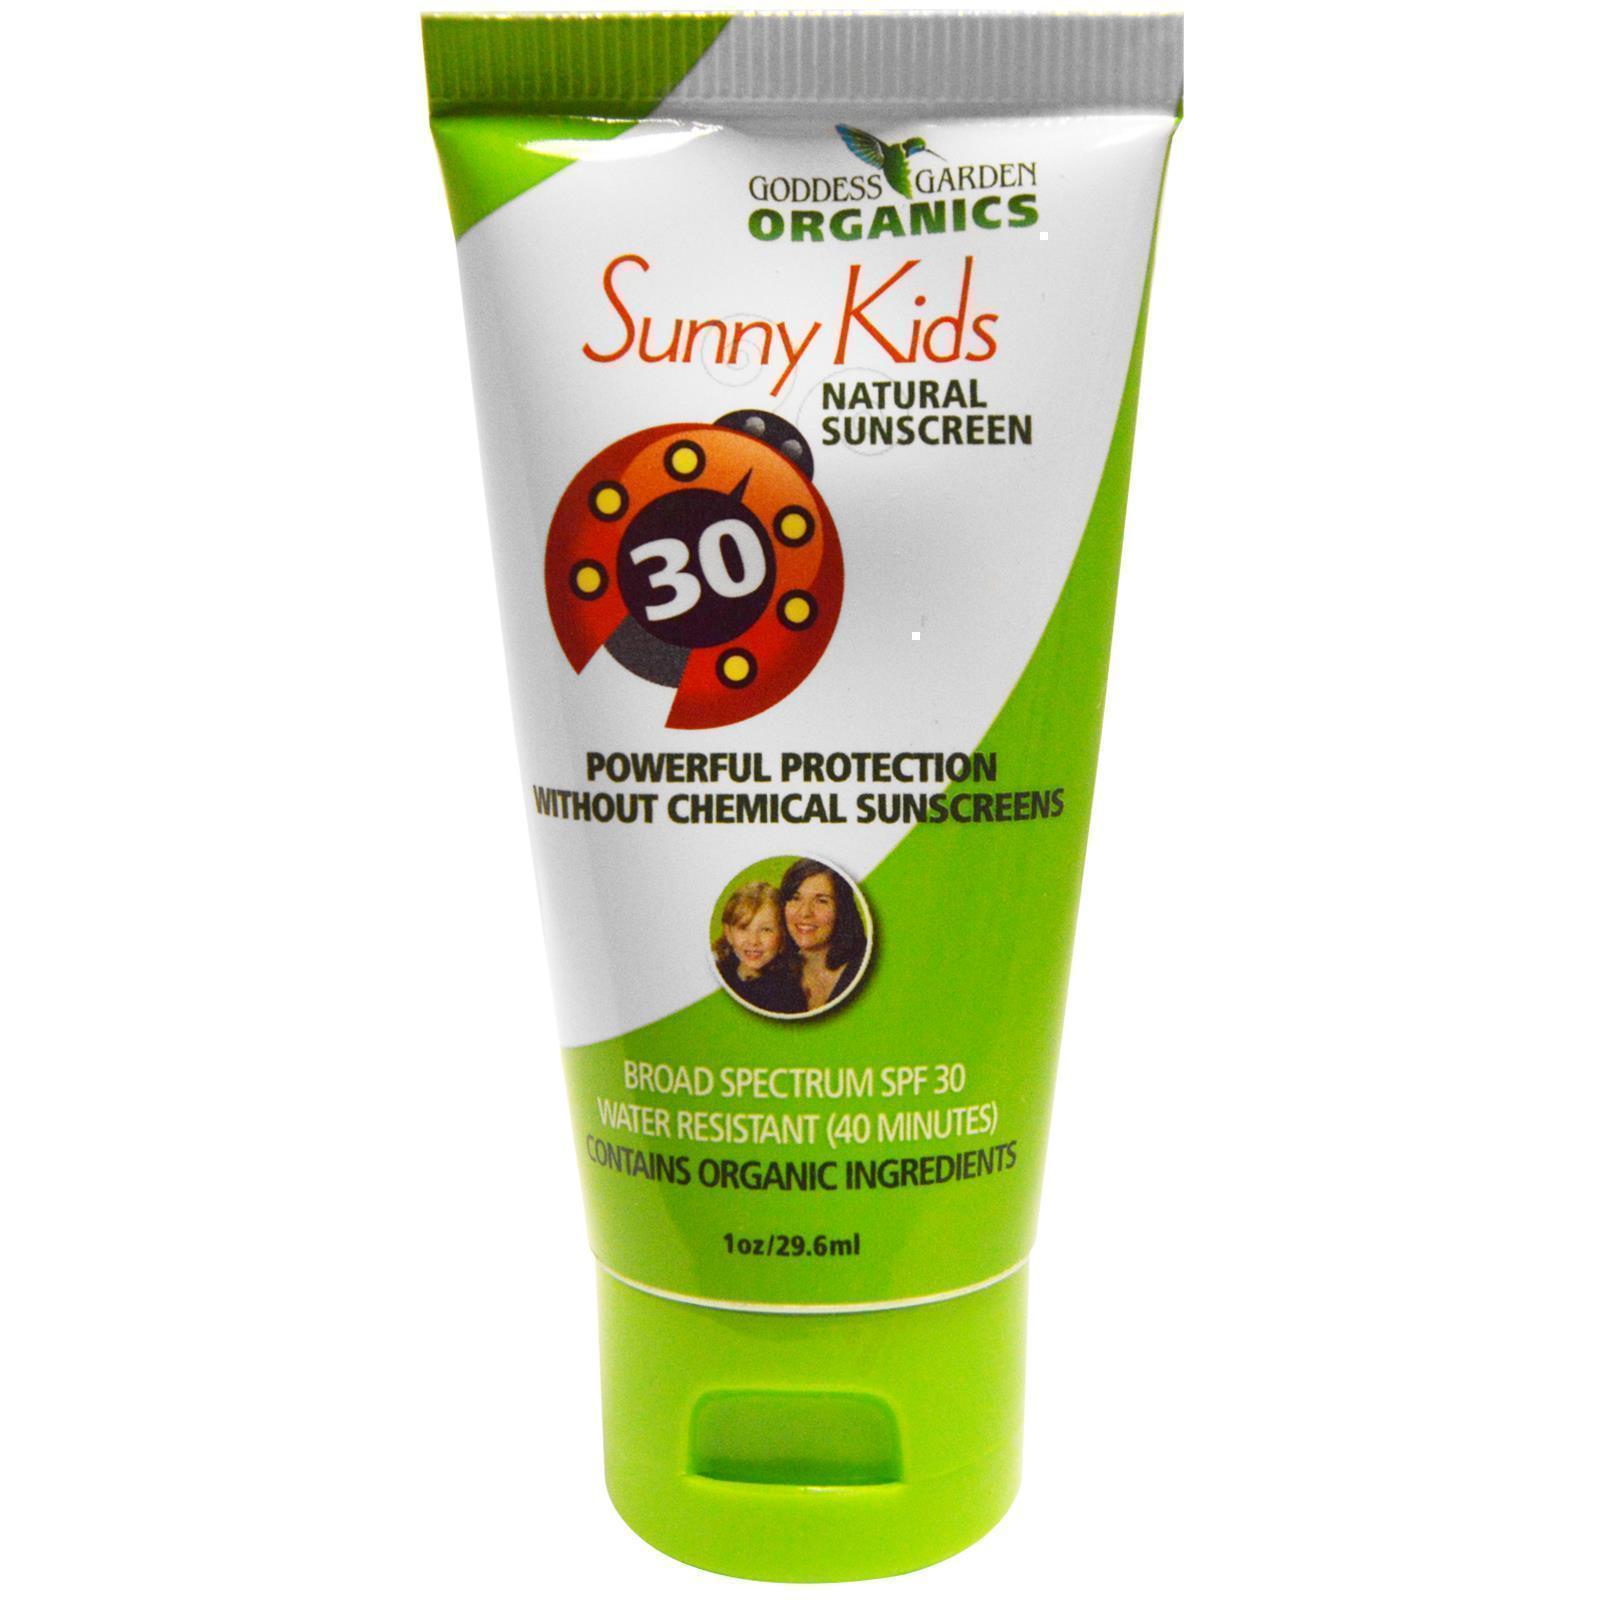 Up to $6 off ONE Goddess Garden Sunscreen | Pay $4.86 at Sprouts